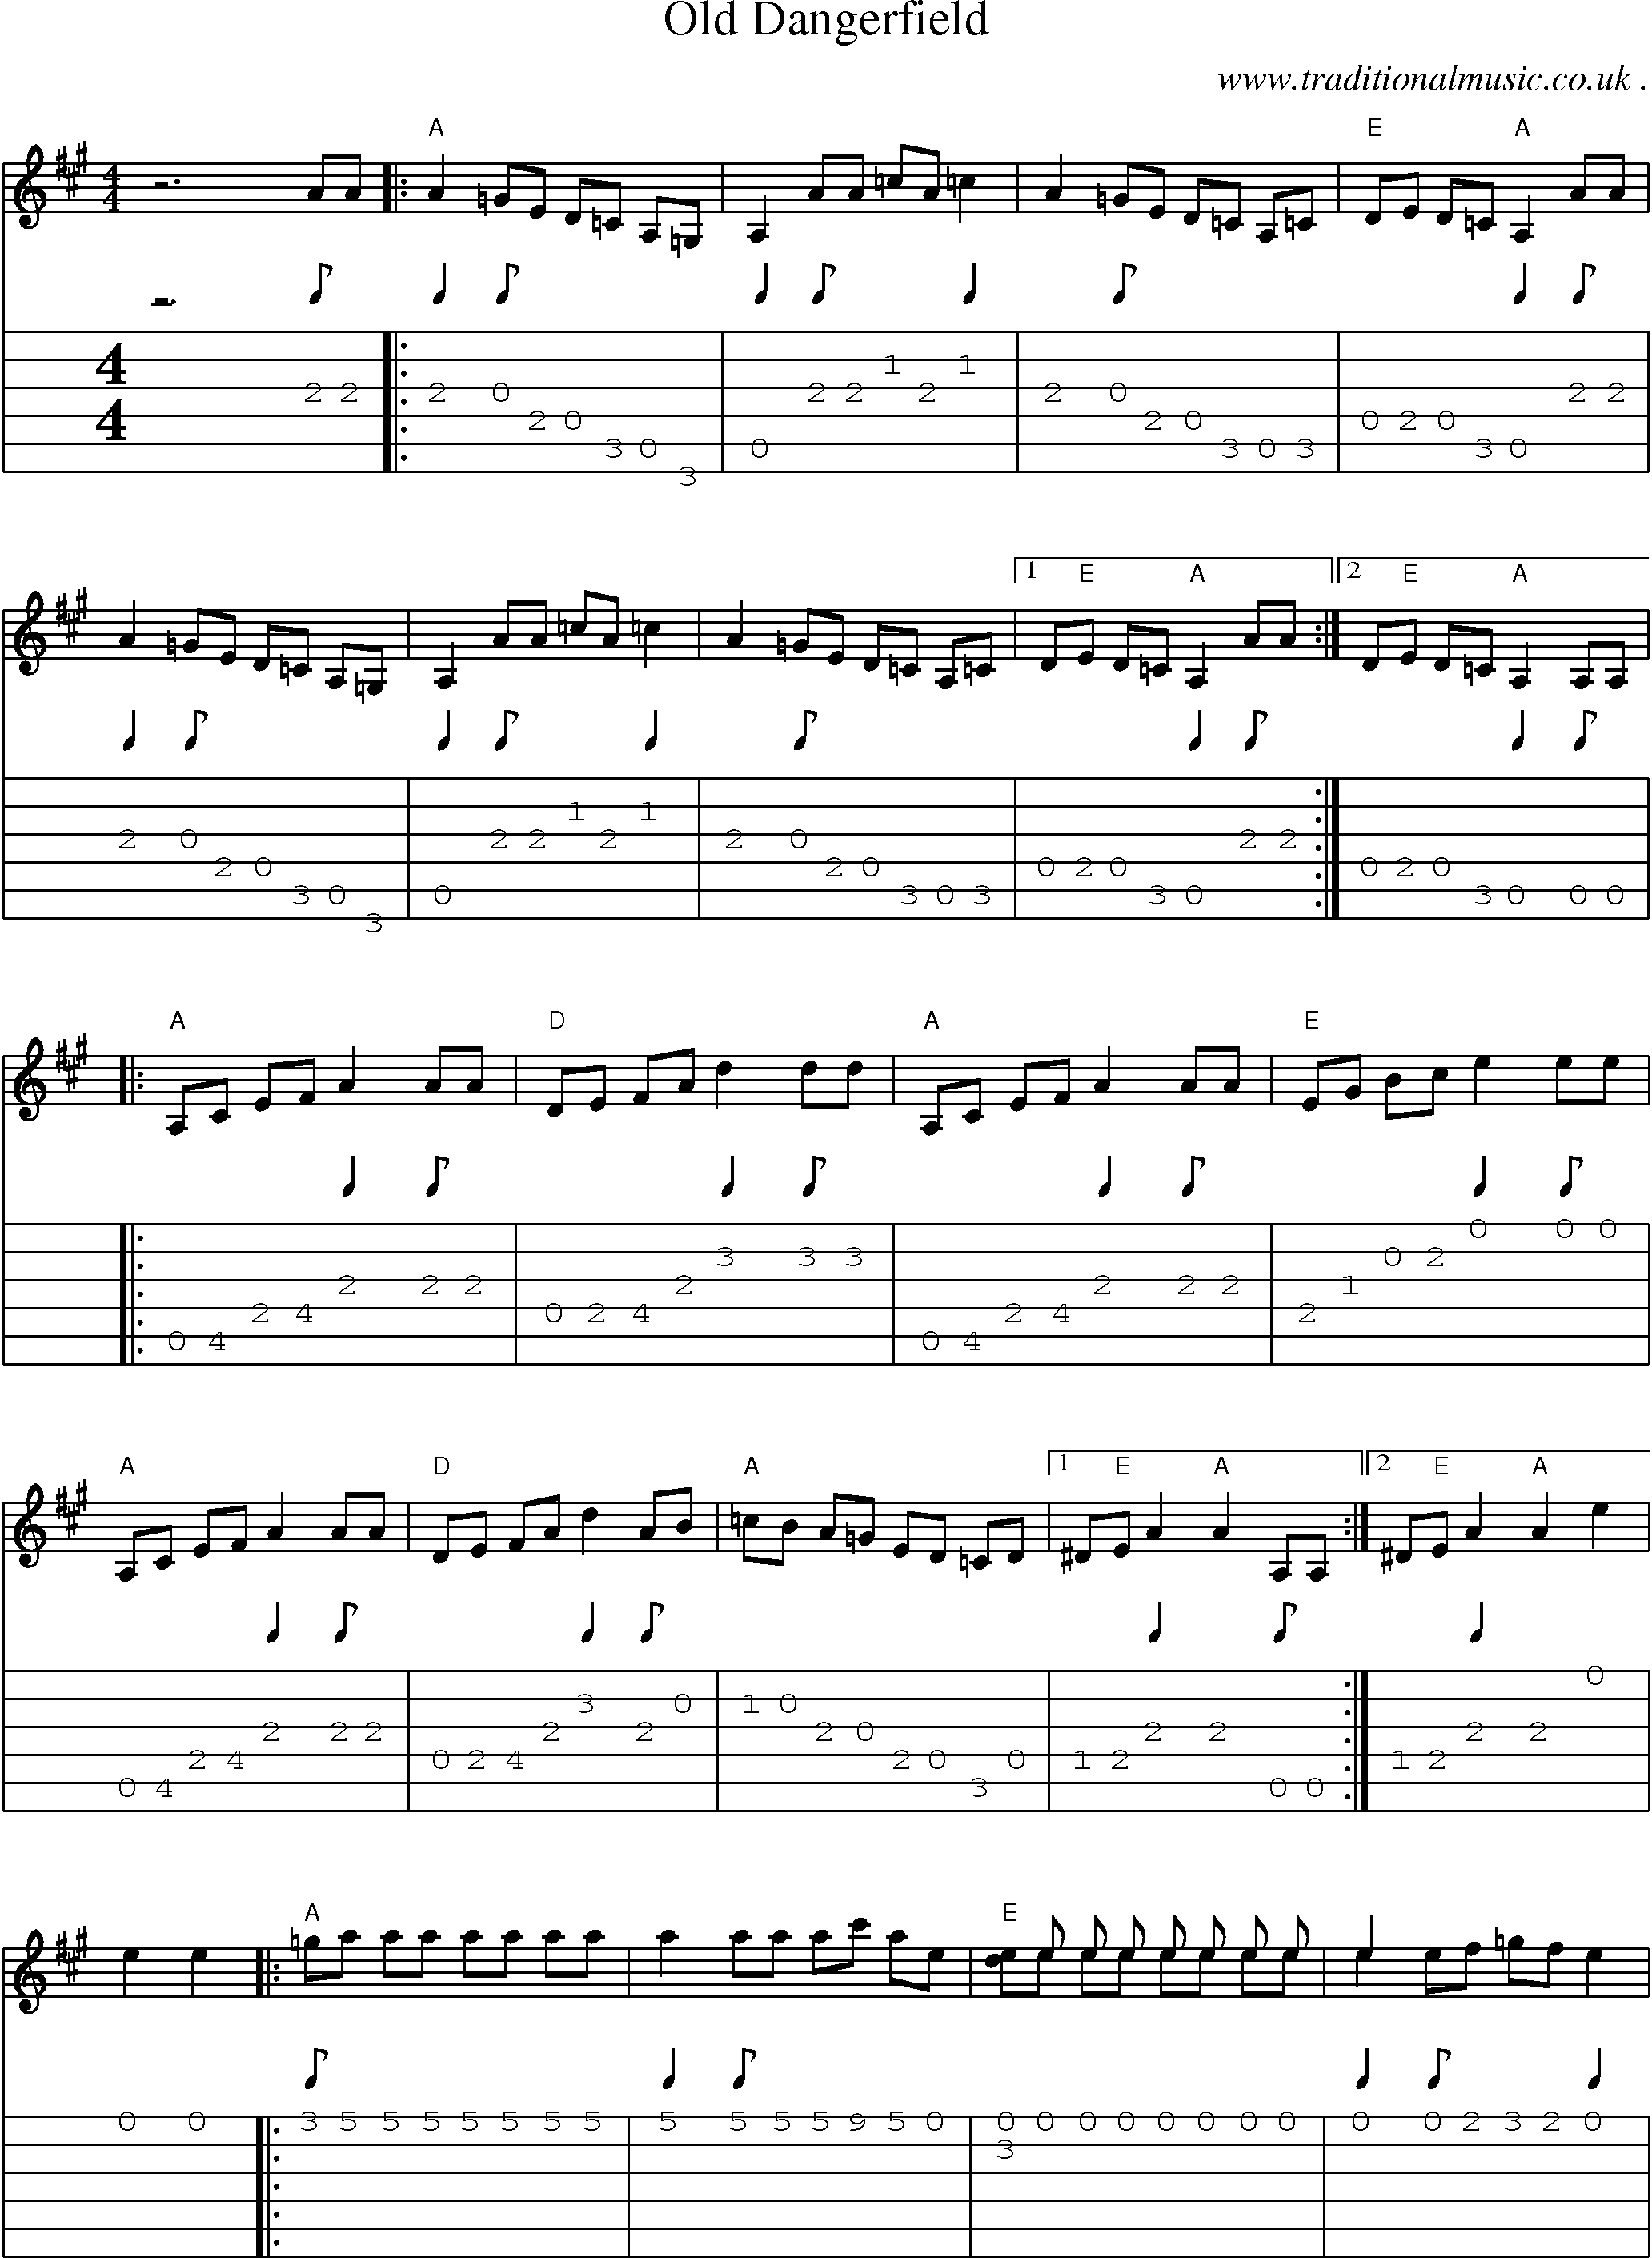 Music Score and Guitar Tabs for Old Dangerfield